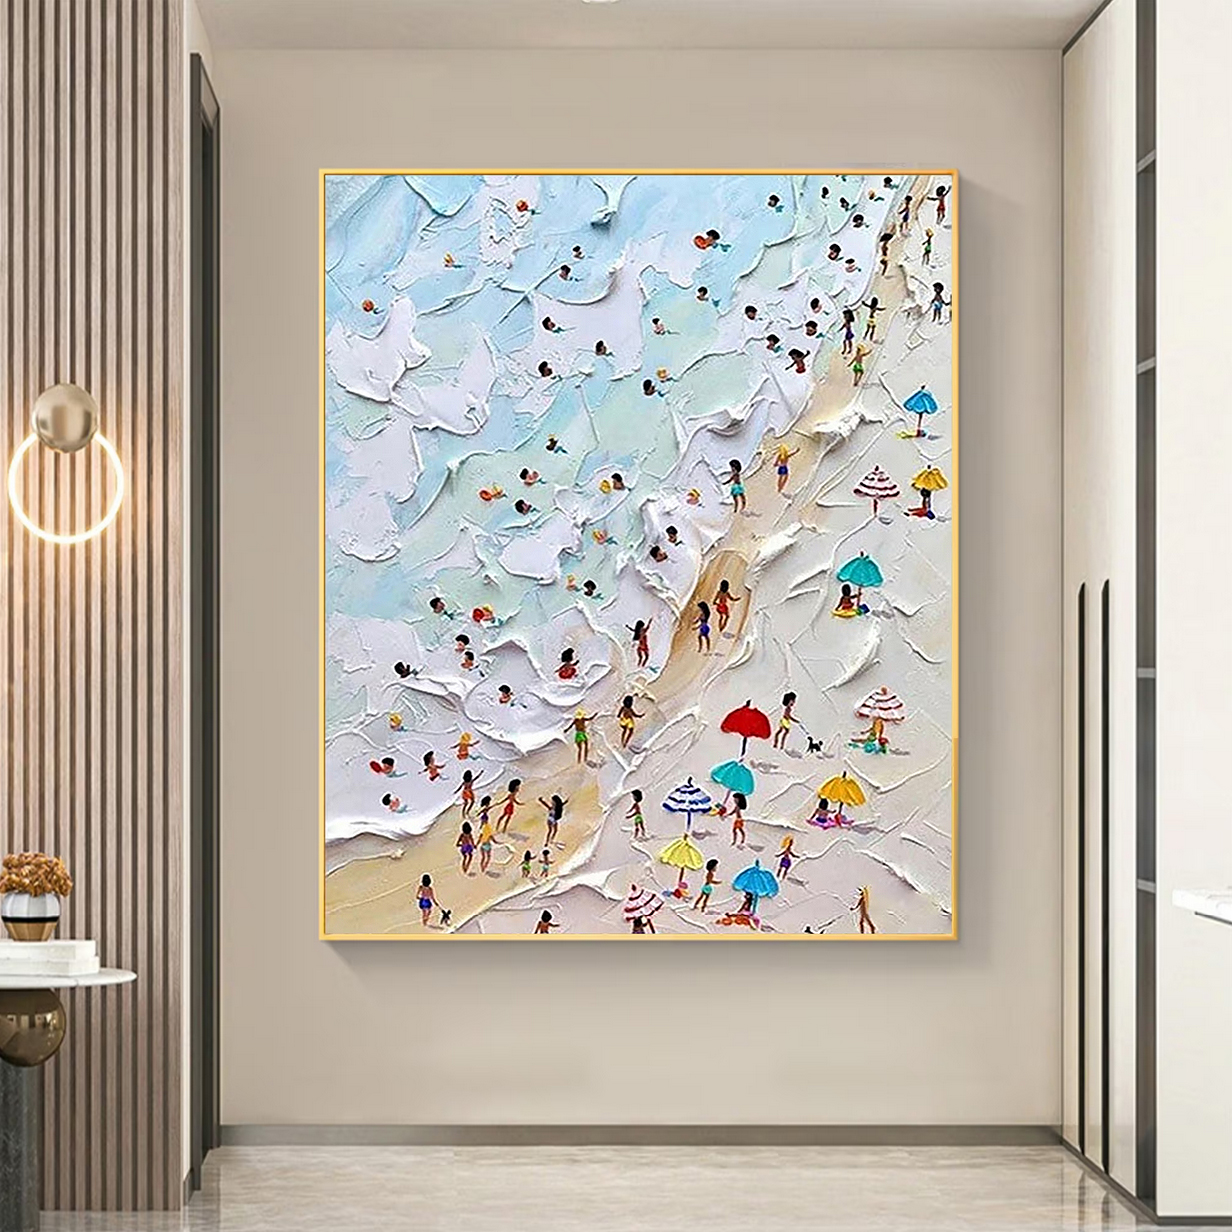 Swimming sport beach summer Room Decor by Knife 02 texture Oil Paintings